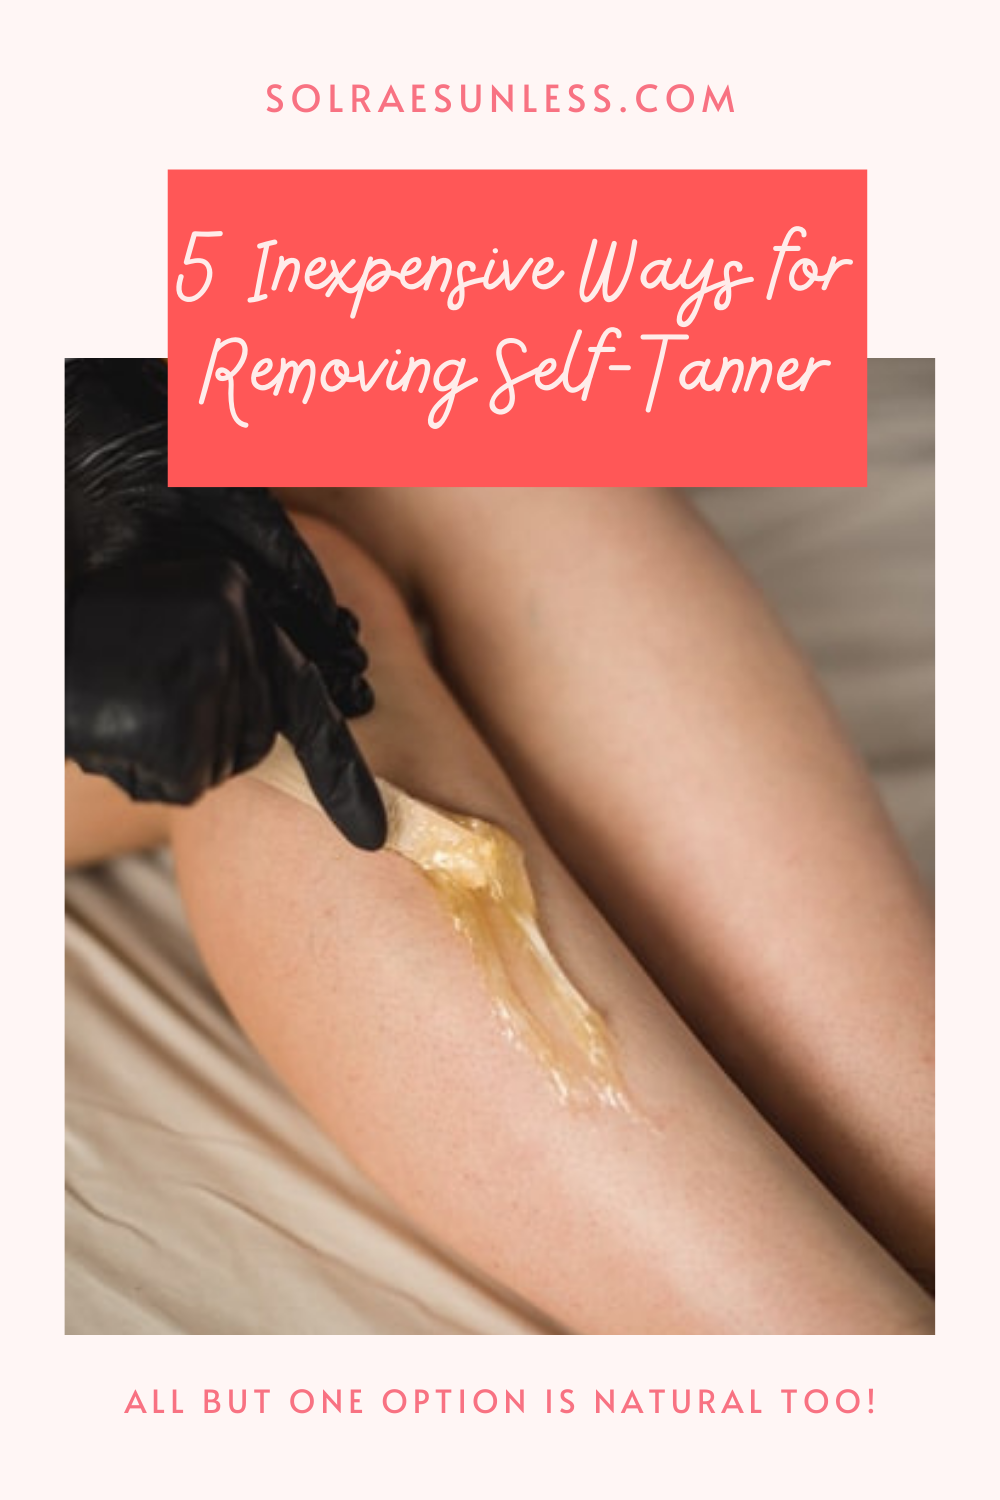 5 Inexpensive Ways for Removing Self-Tanner